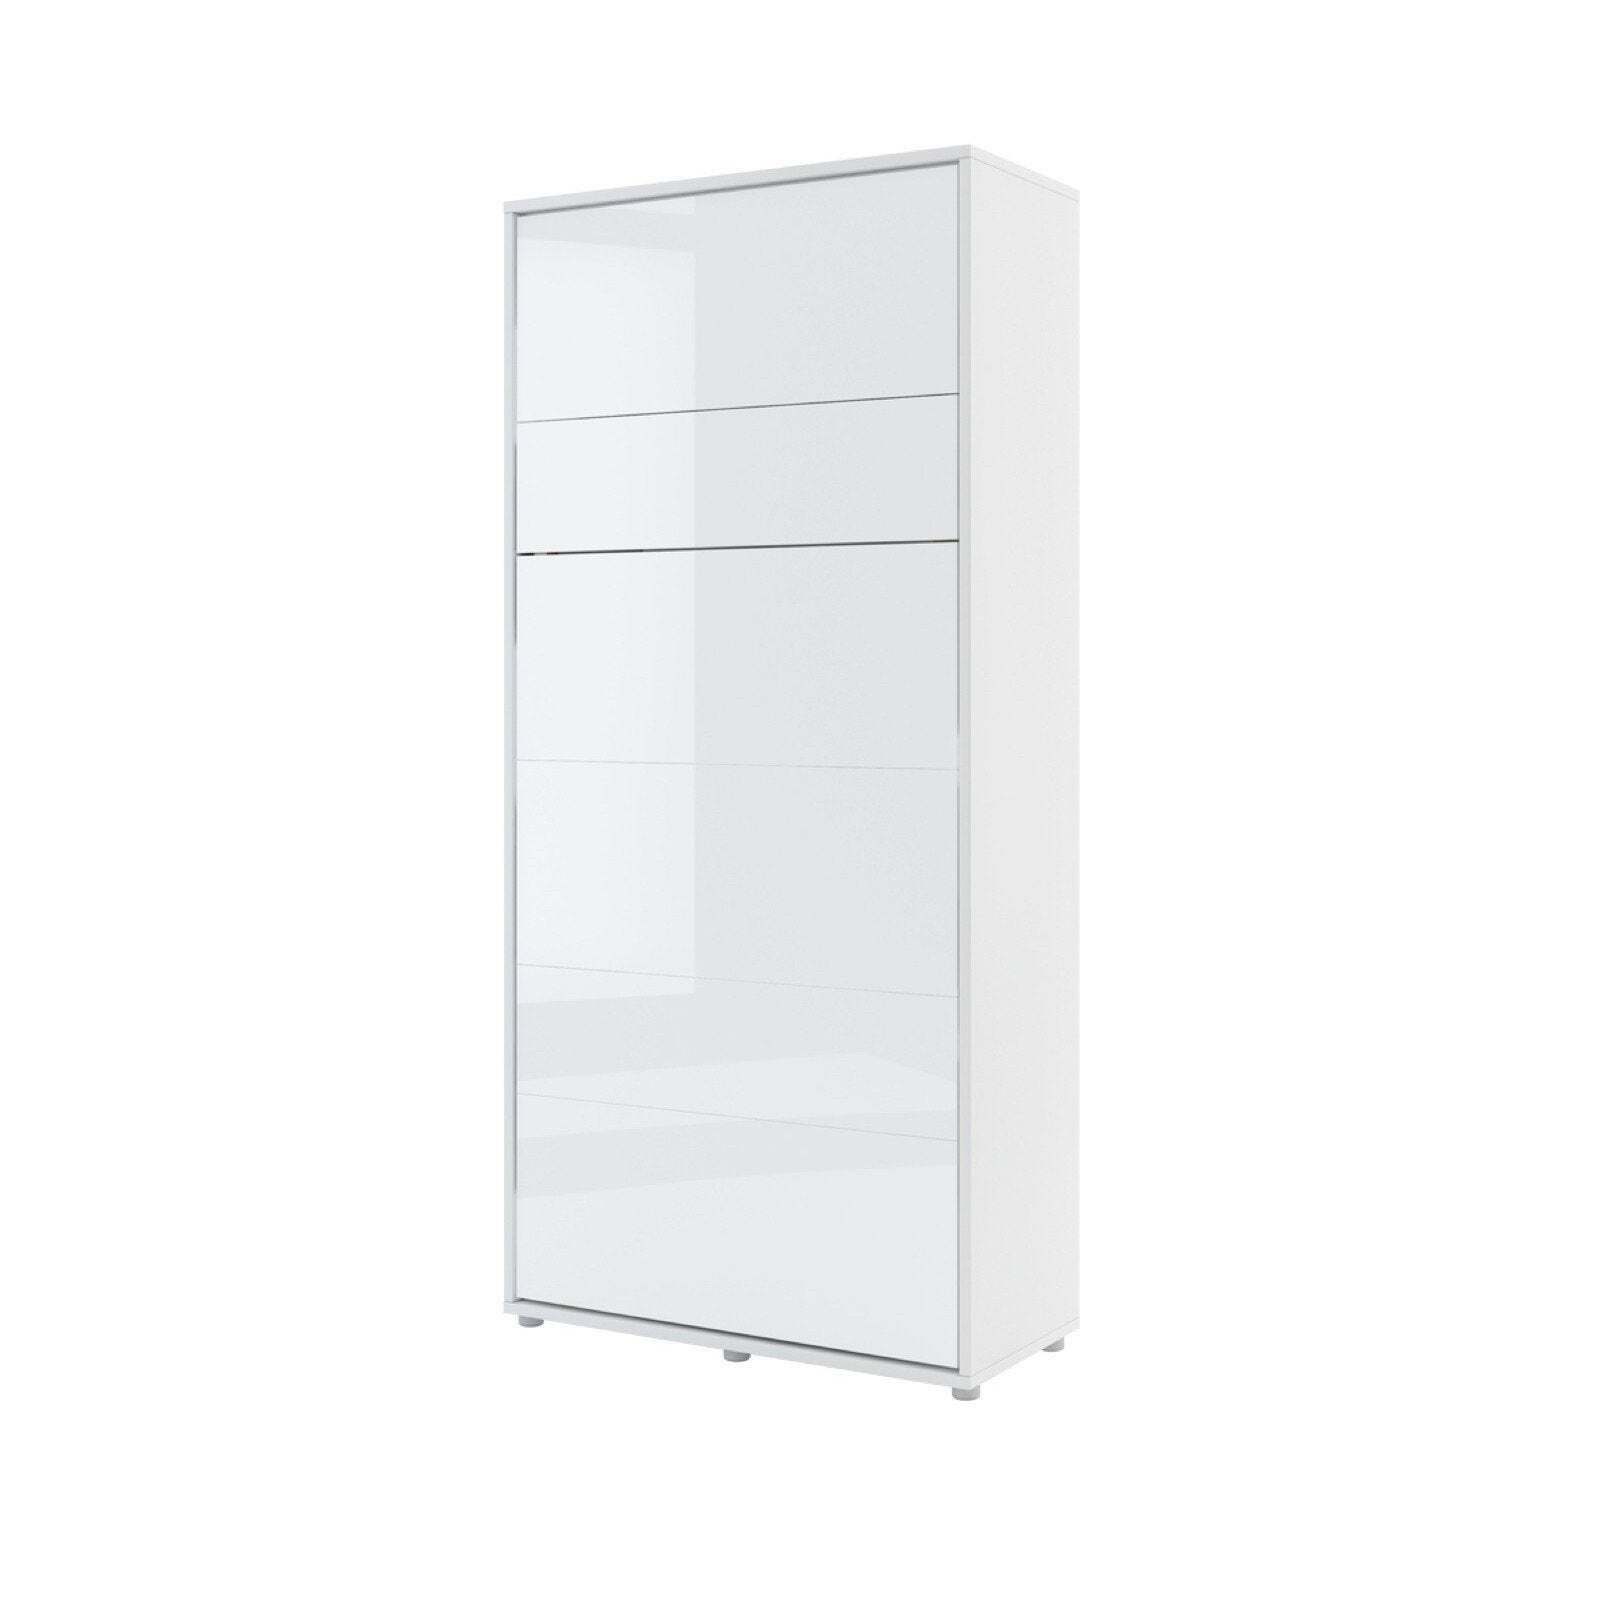 BC-03 Vertical Wall Bed Concept 90cm With Storage Cabinets and LED - White Gloss 90 x 200cm - image 1